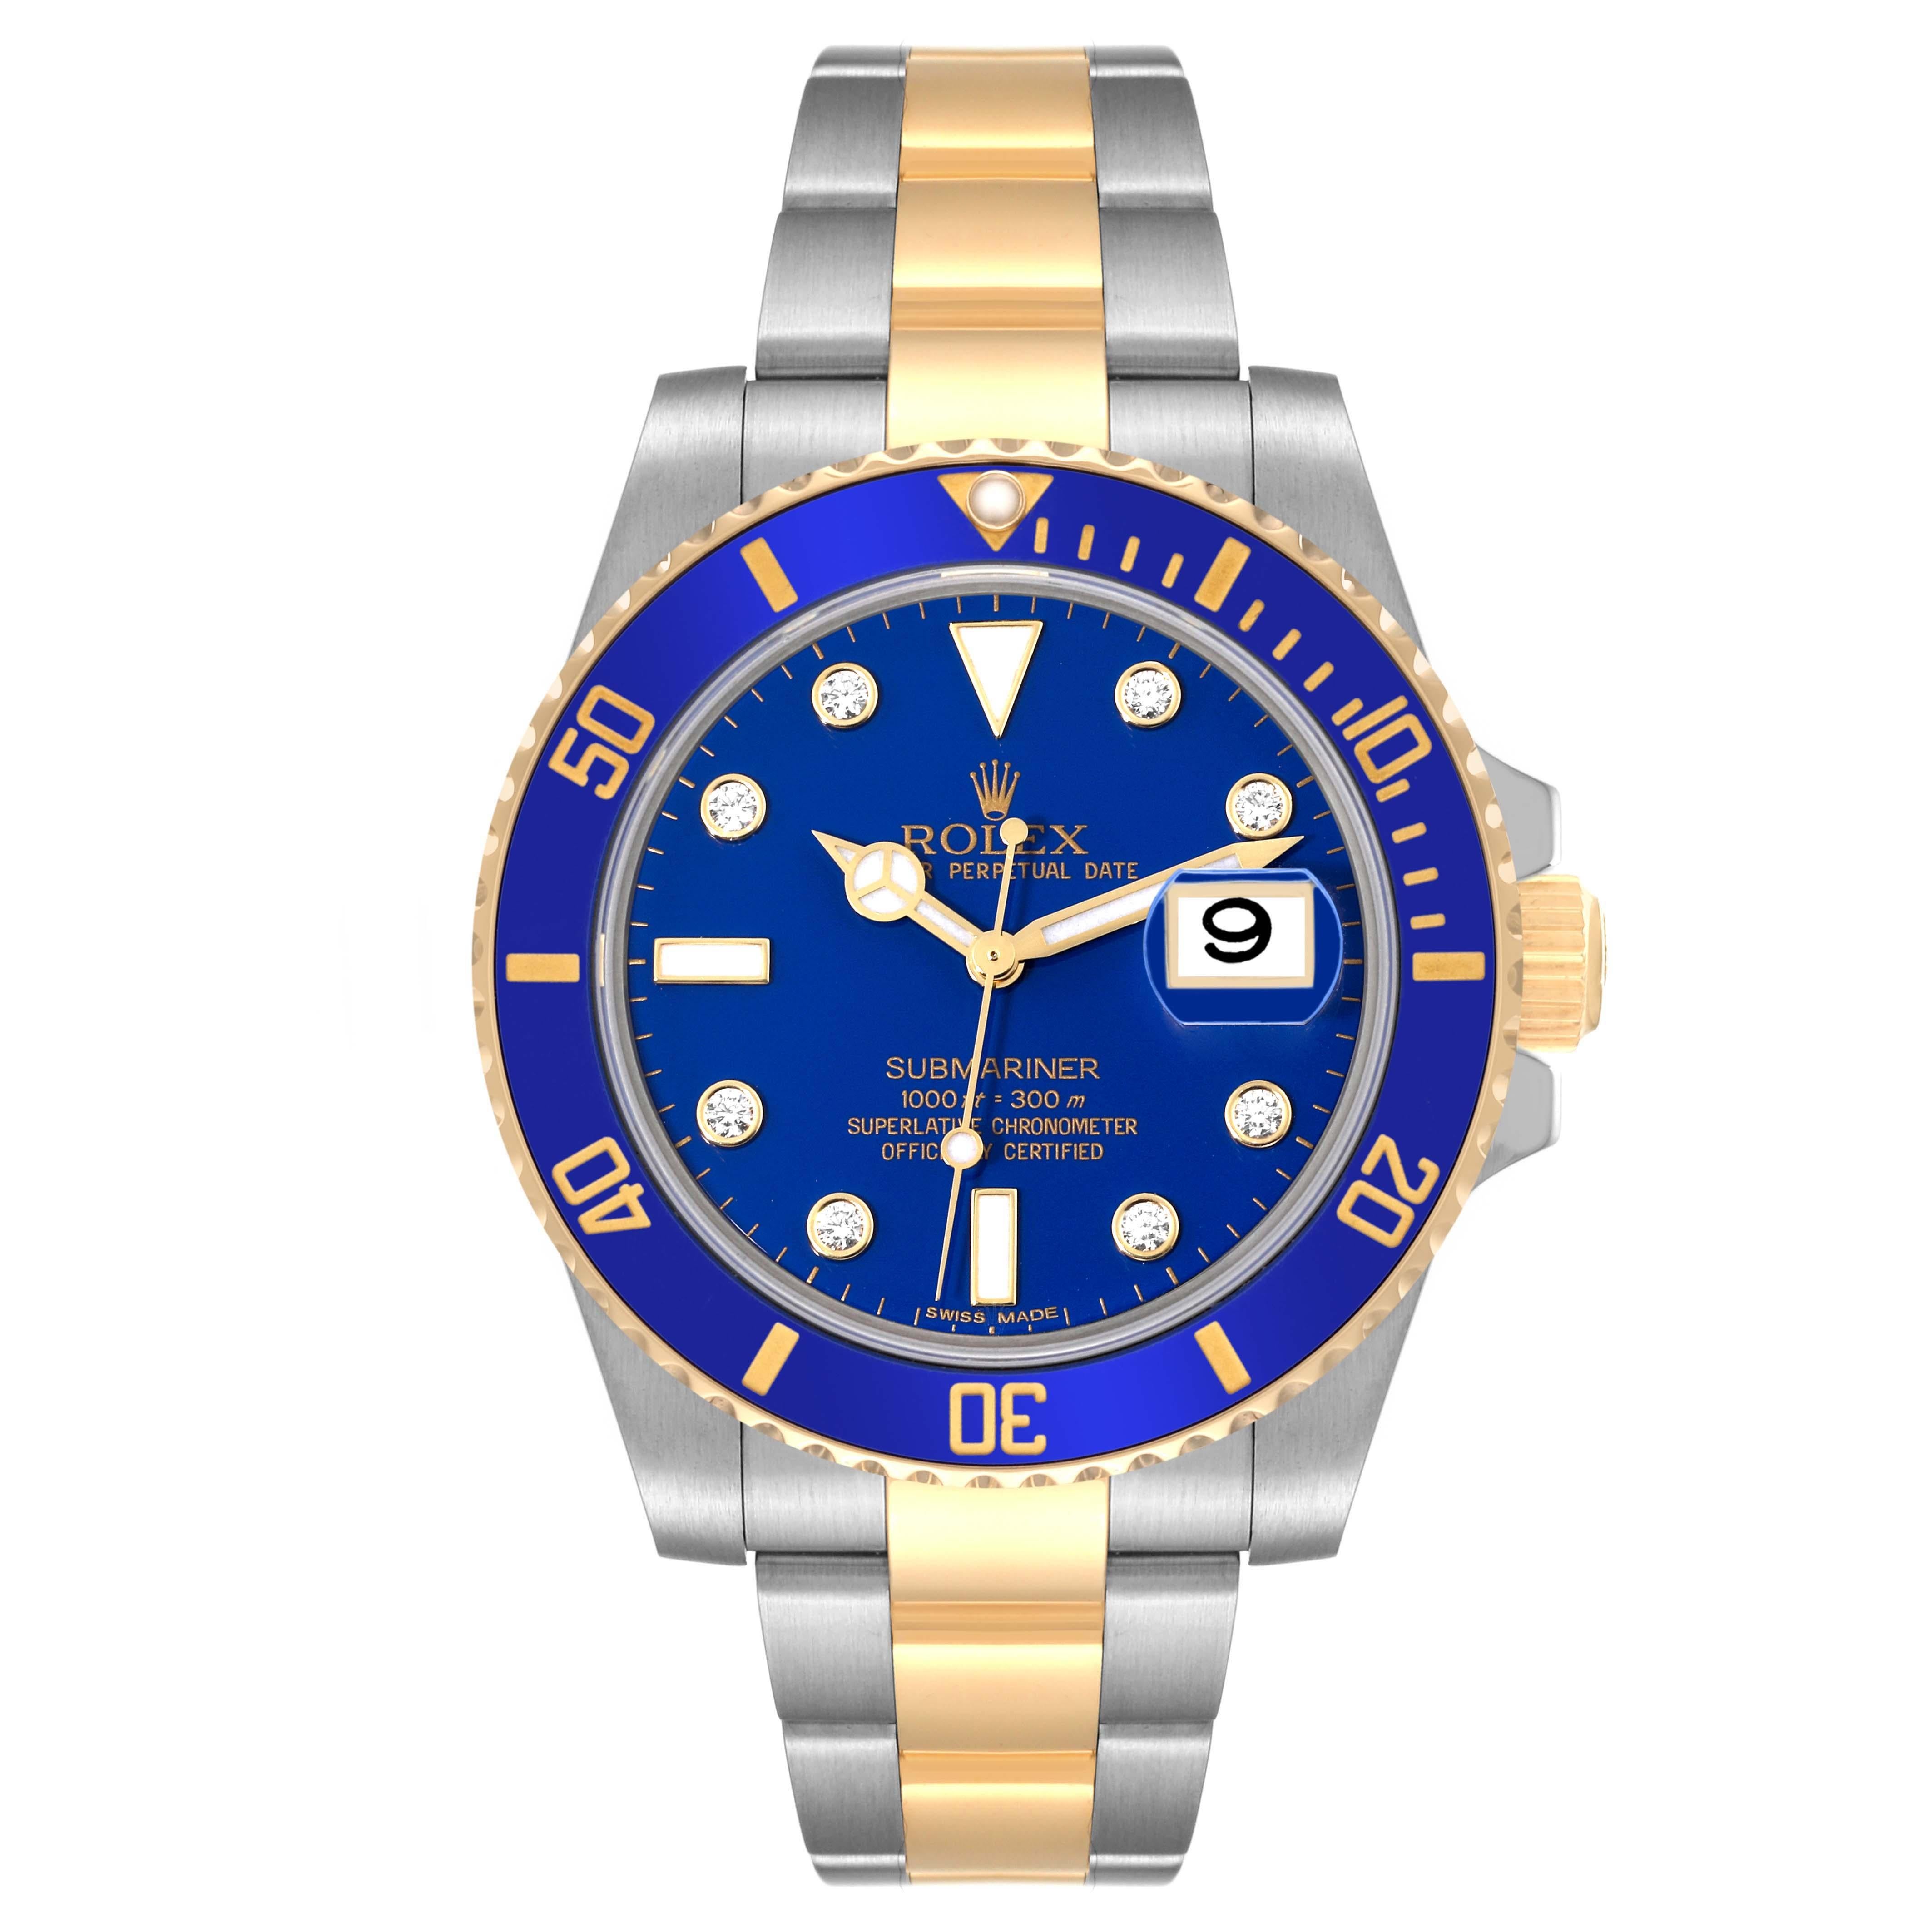 Rolex Submariner Steel Yellow Gold Blue Diamond Dial Mens Watch 116613. Officially certified chronometer self-winding movement. Stainless steel and 18k yellow gold case 40.0 mm in diameter. Rolex logo on a crown. Ceramic blue Ion-plated special